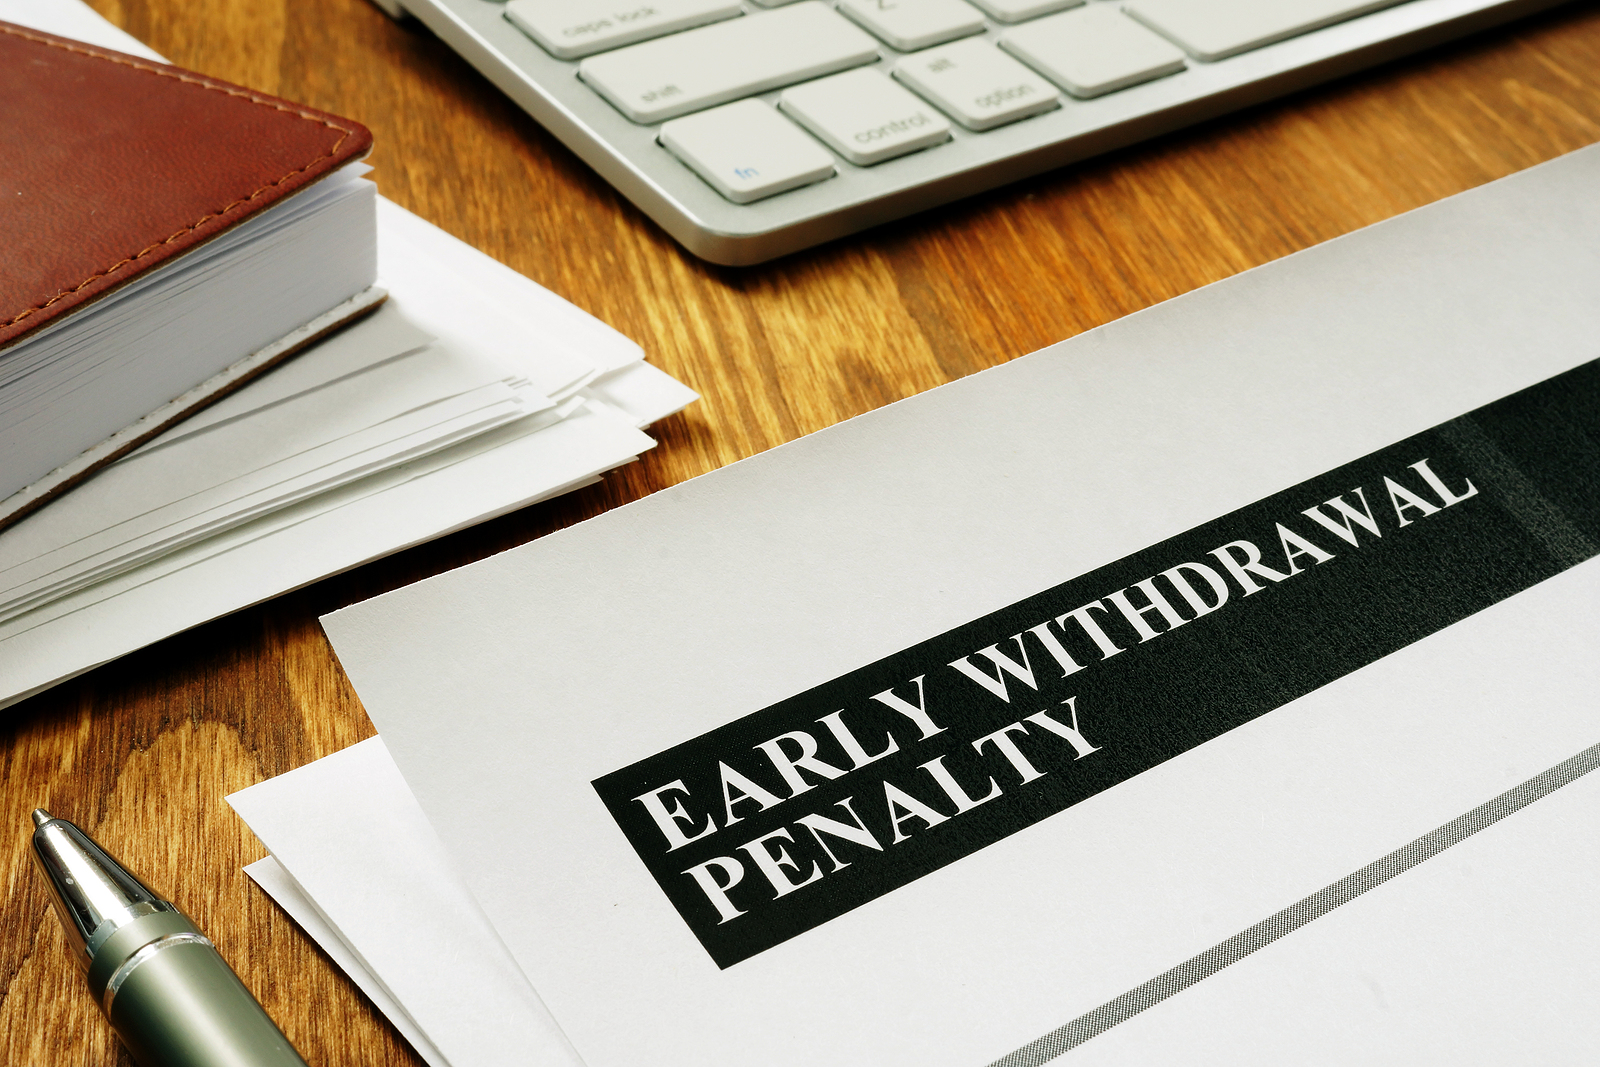 Penalty for early retirement 